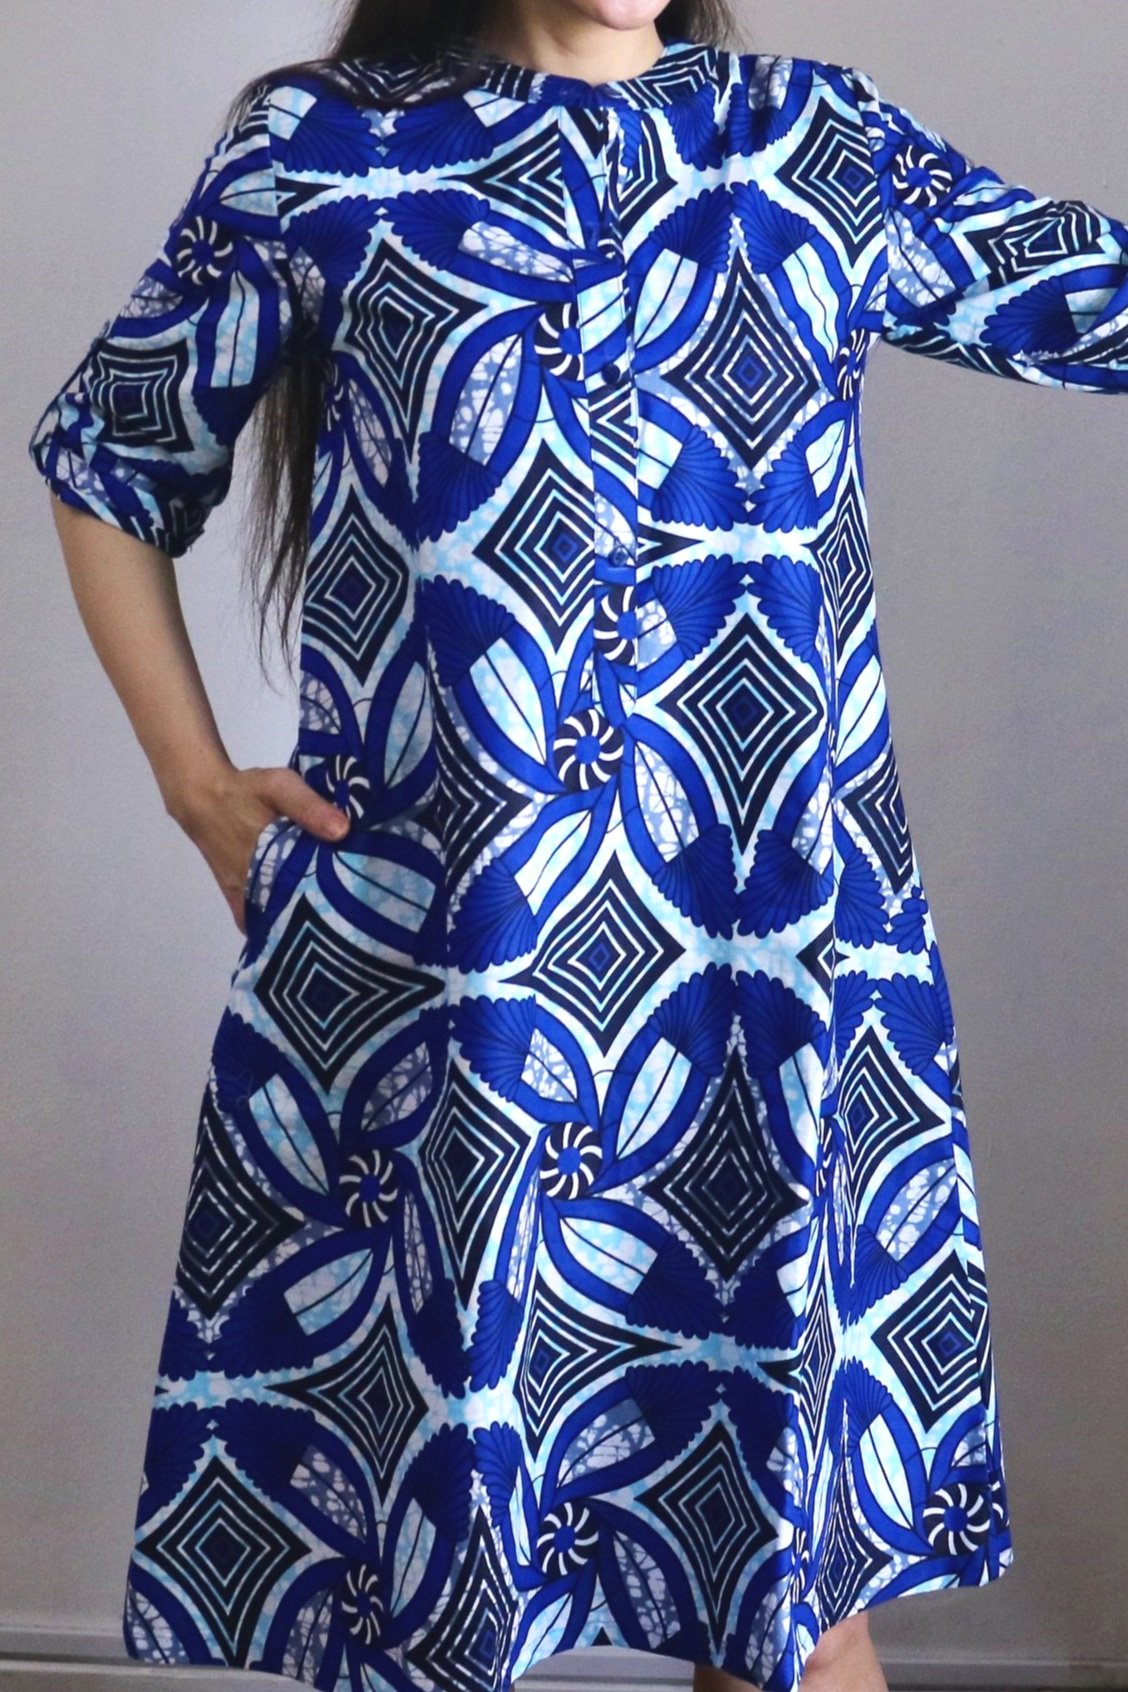 Shop print dresses | Womenswear Inspired By Ethnic Prints